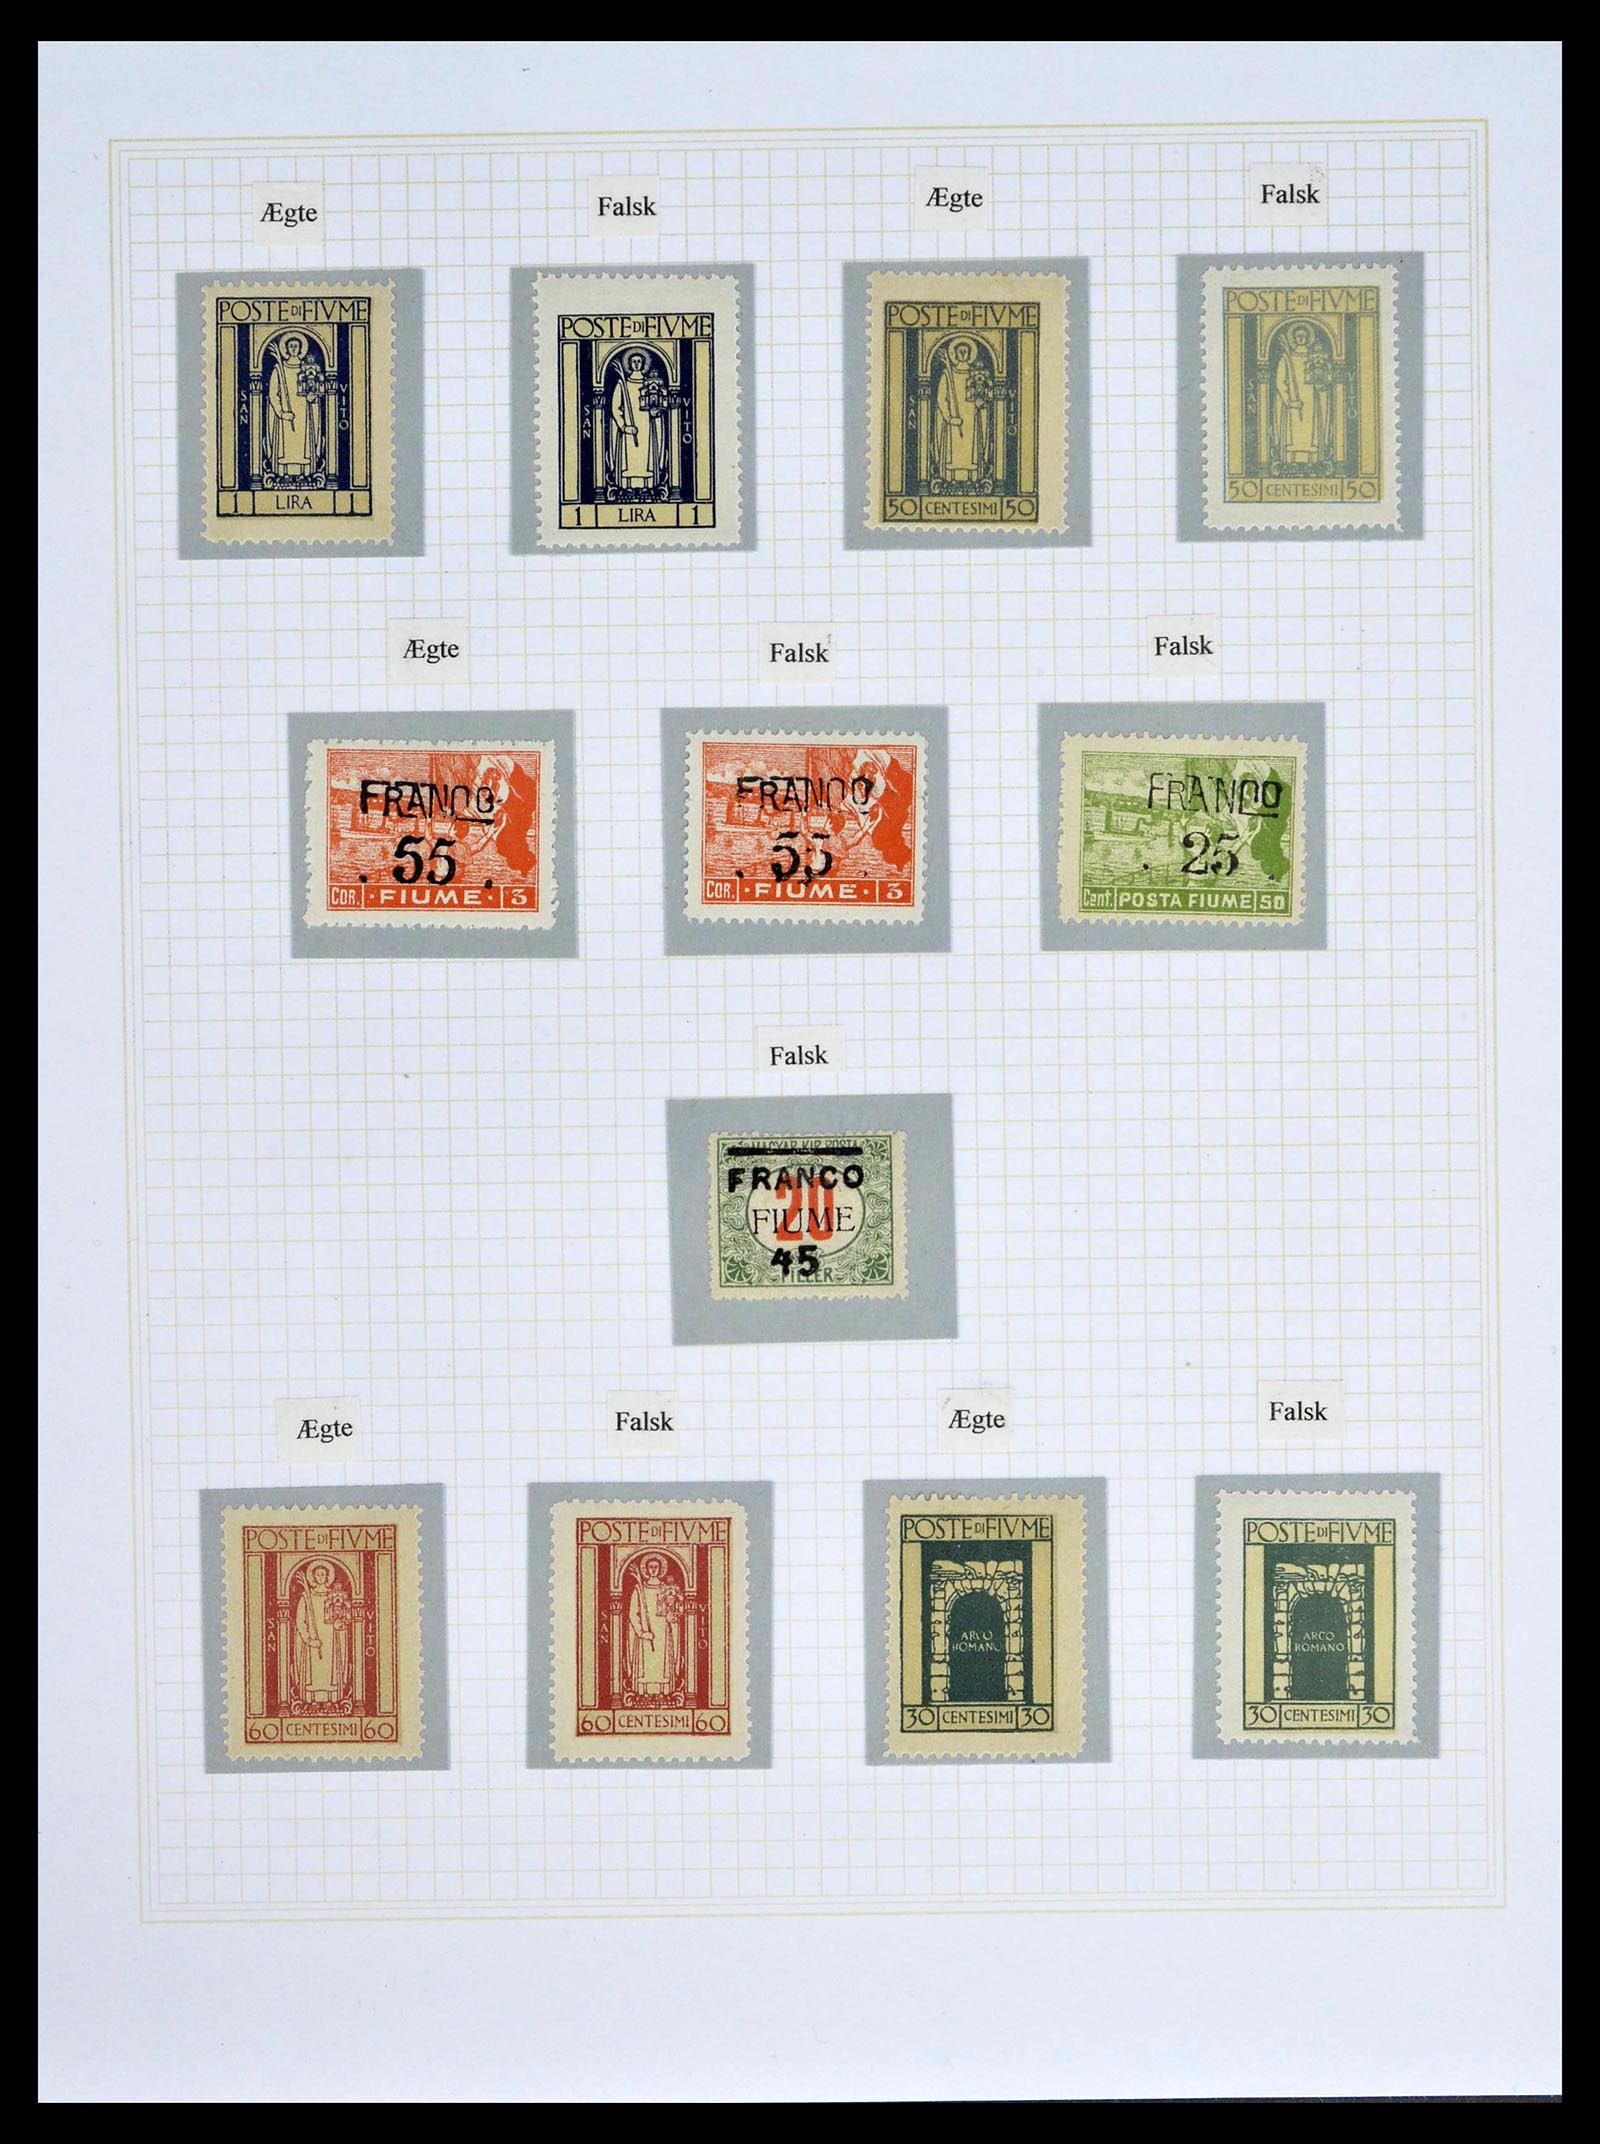 39100 0062 - Stamp collection 39100 Fiume exhibition collection 1850-1945.